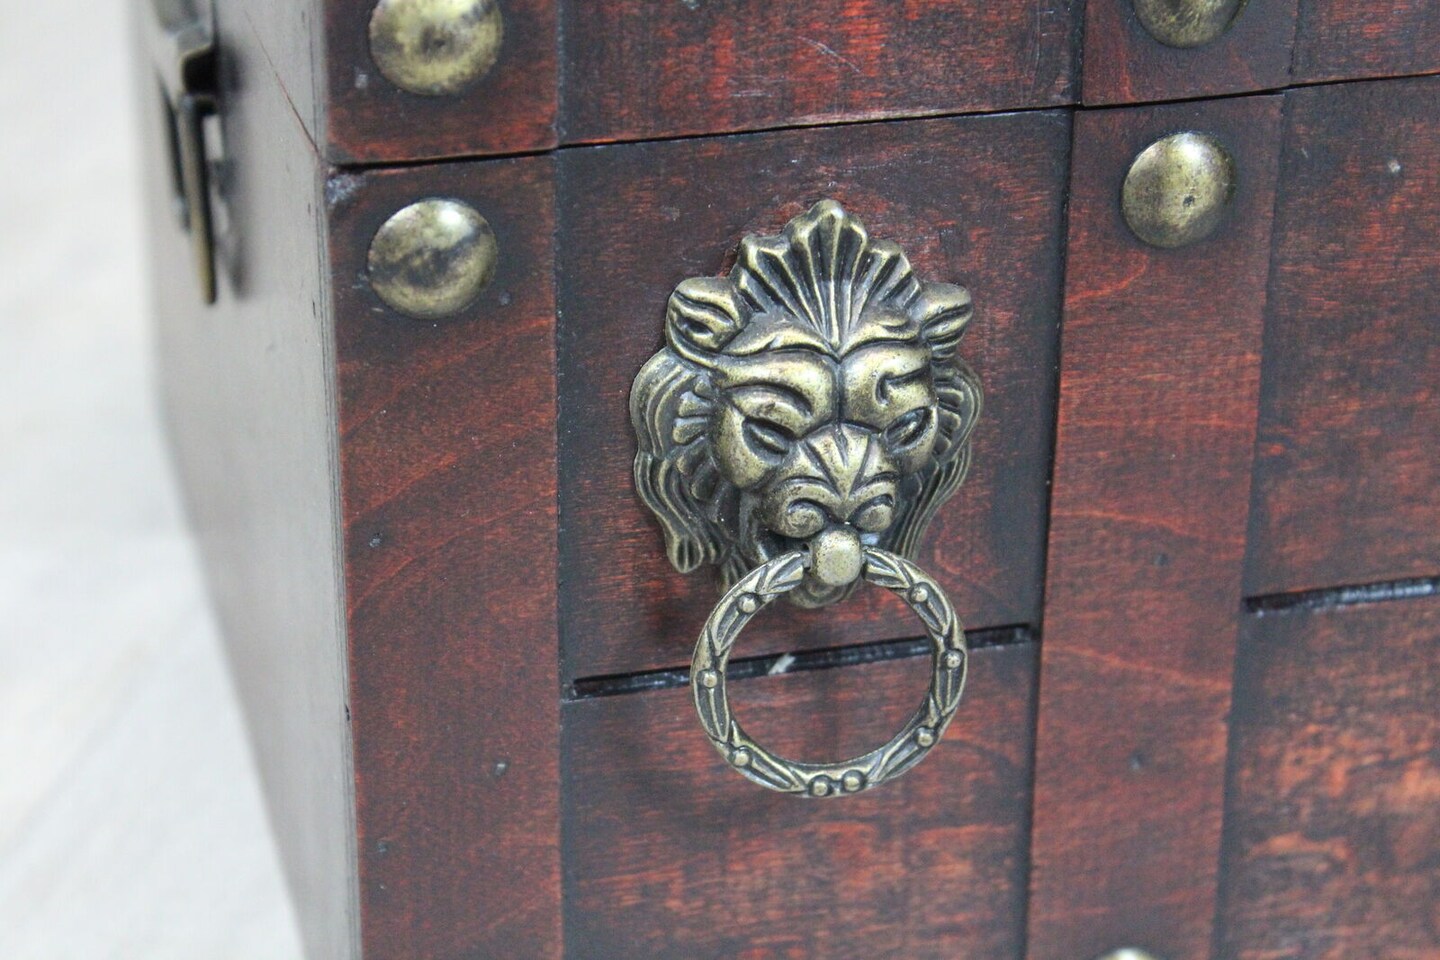 Antique Wooden Pirate Treasure Chest with Lion Rings and Lockable Latch